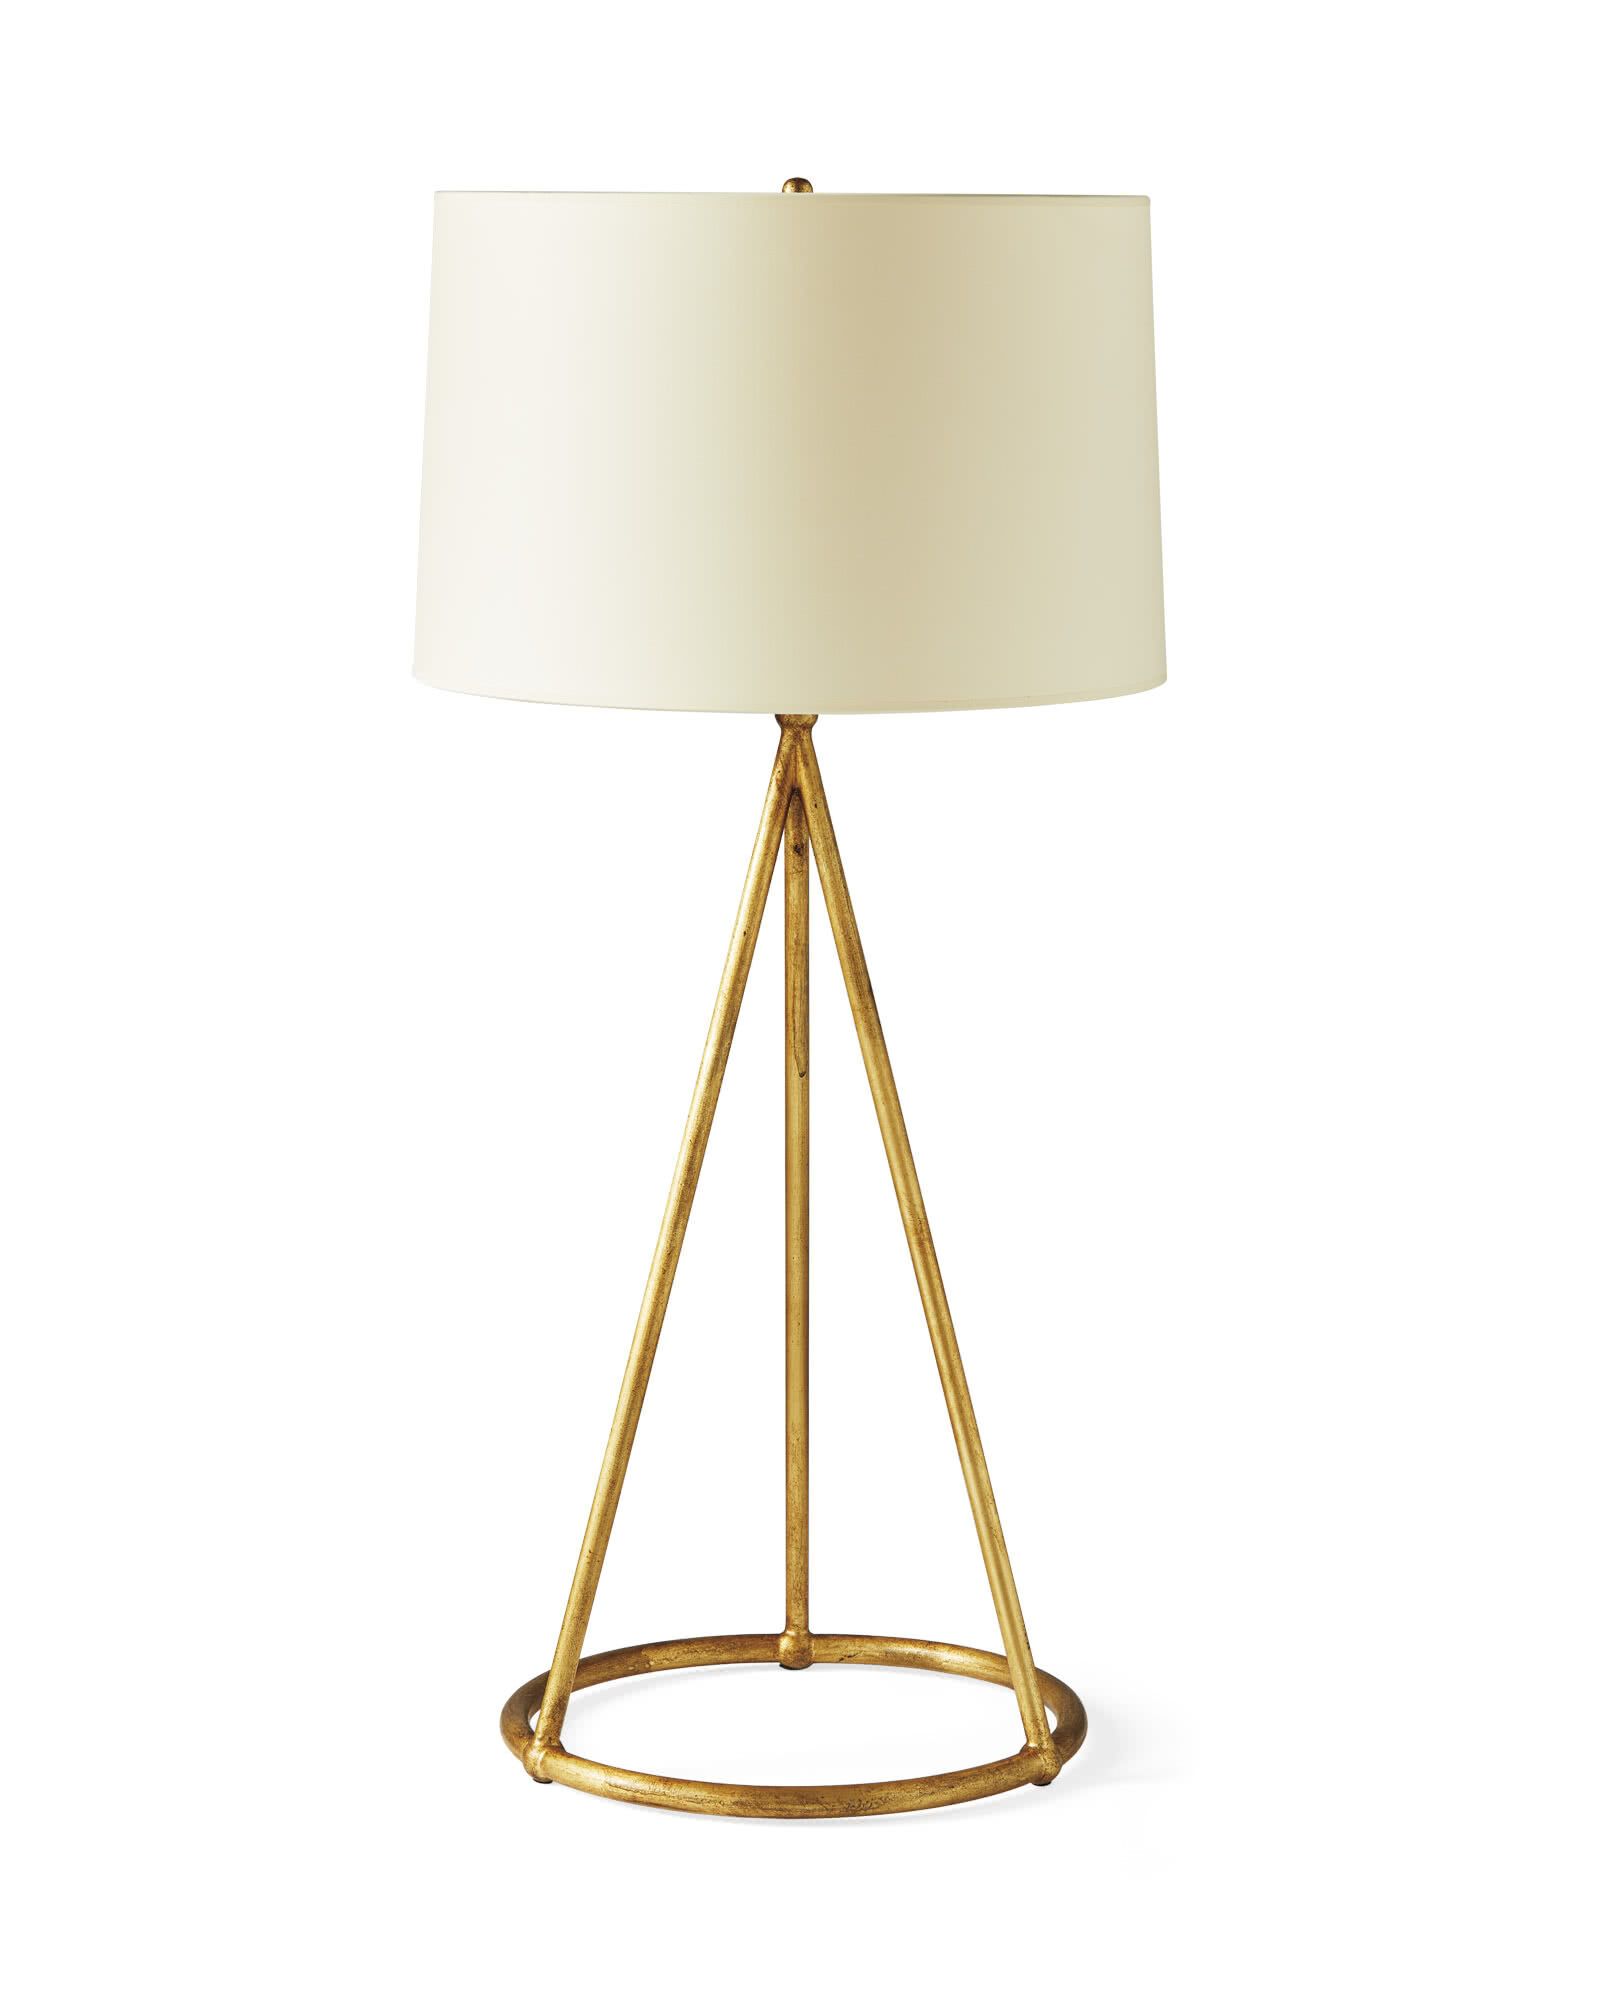 Greenwood Table Lamp | Serena and Lily